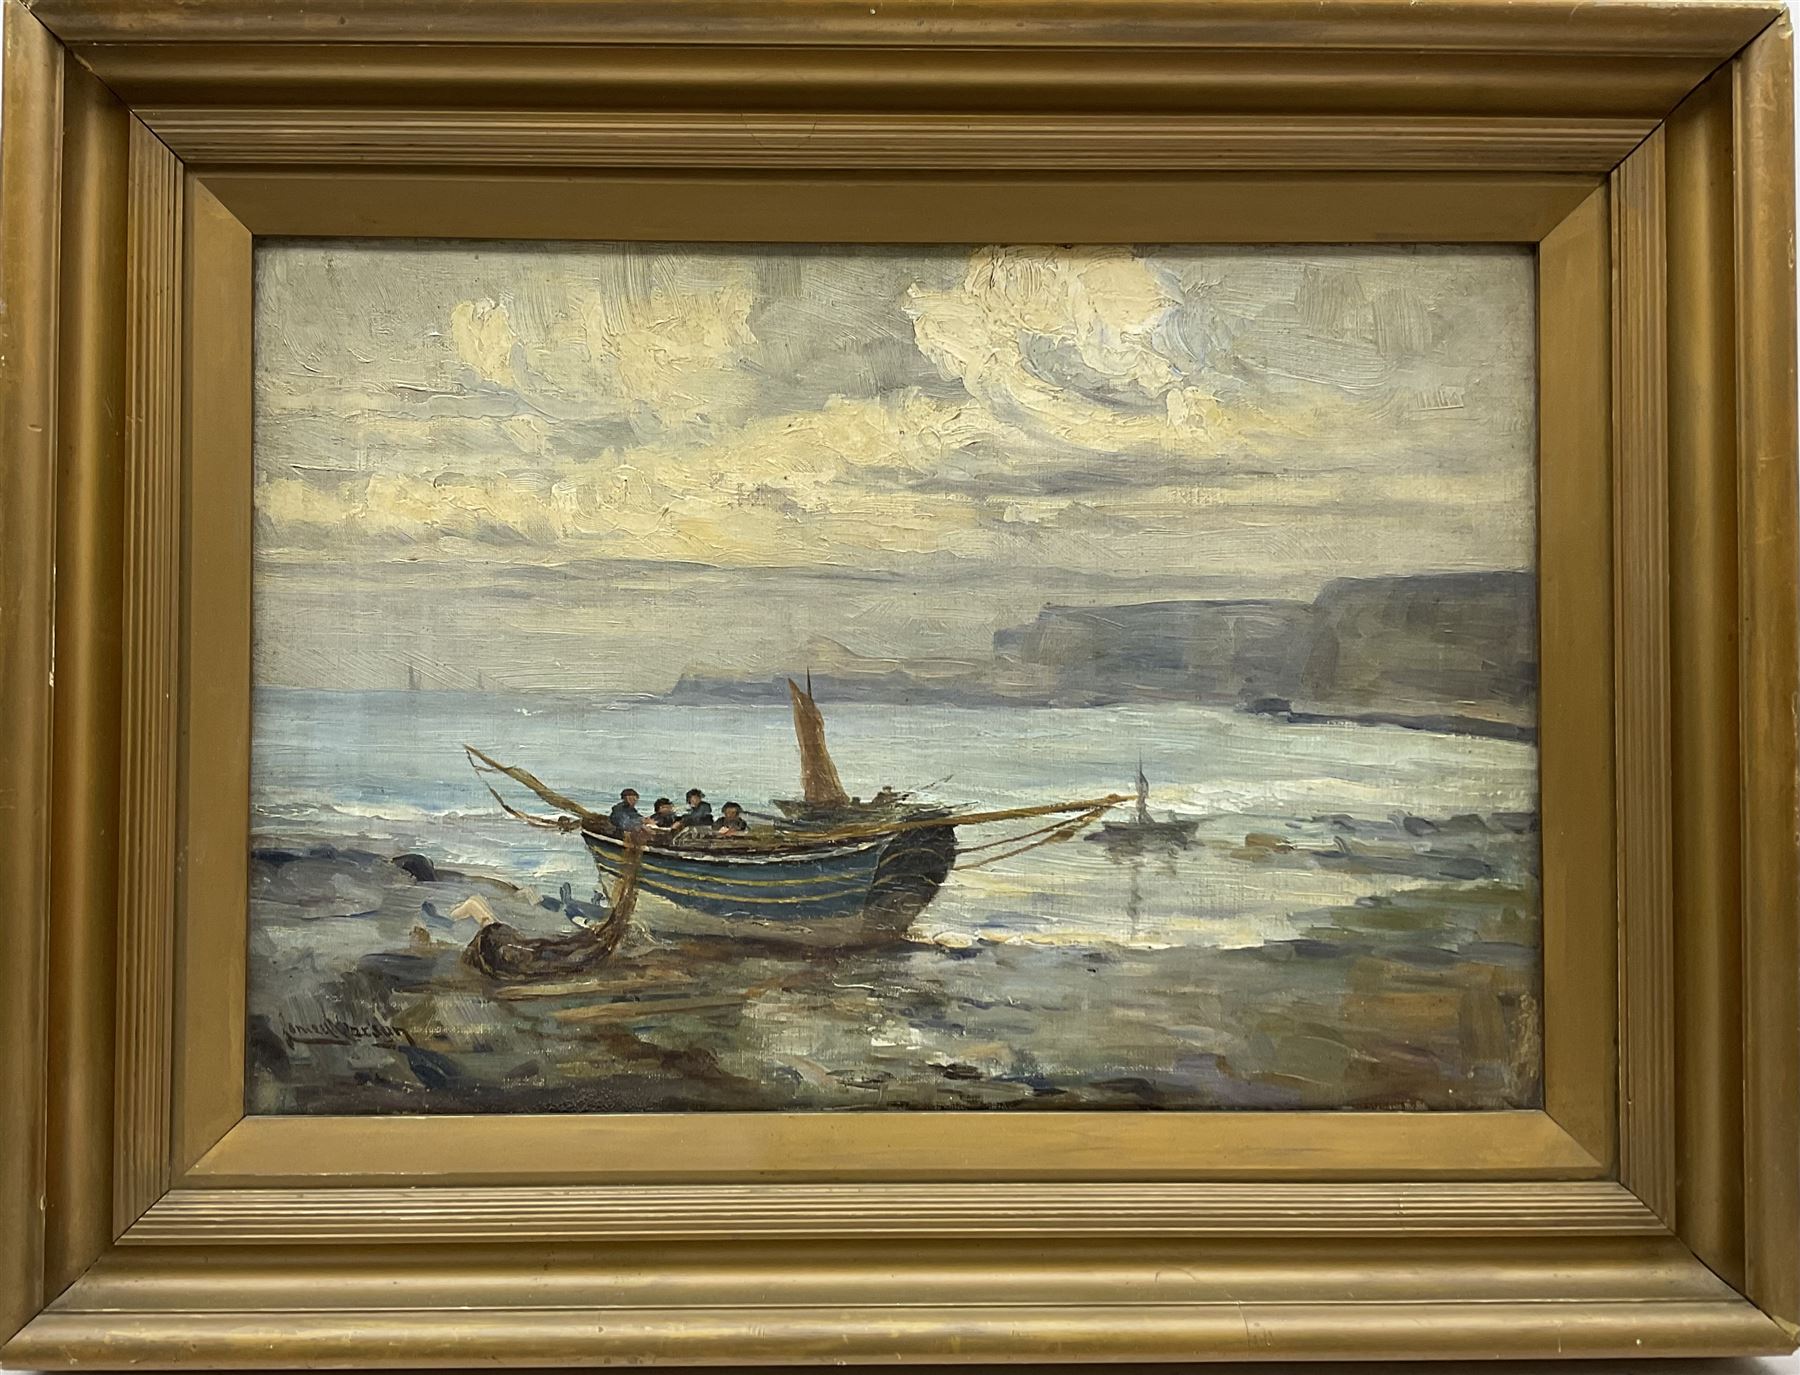 James Watson (Staithes Group 1851-1936): Cobles on the Shoreline Runswick Bay - Image 2 of 4